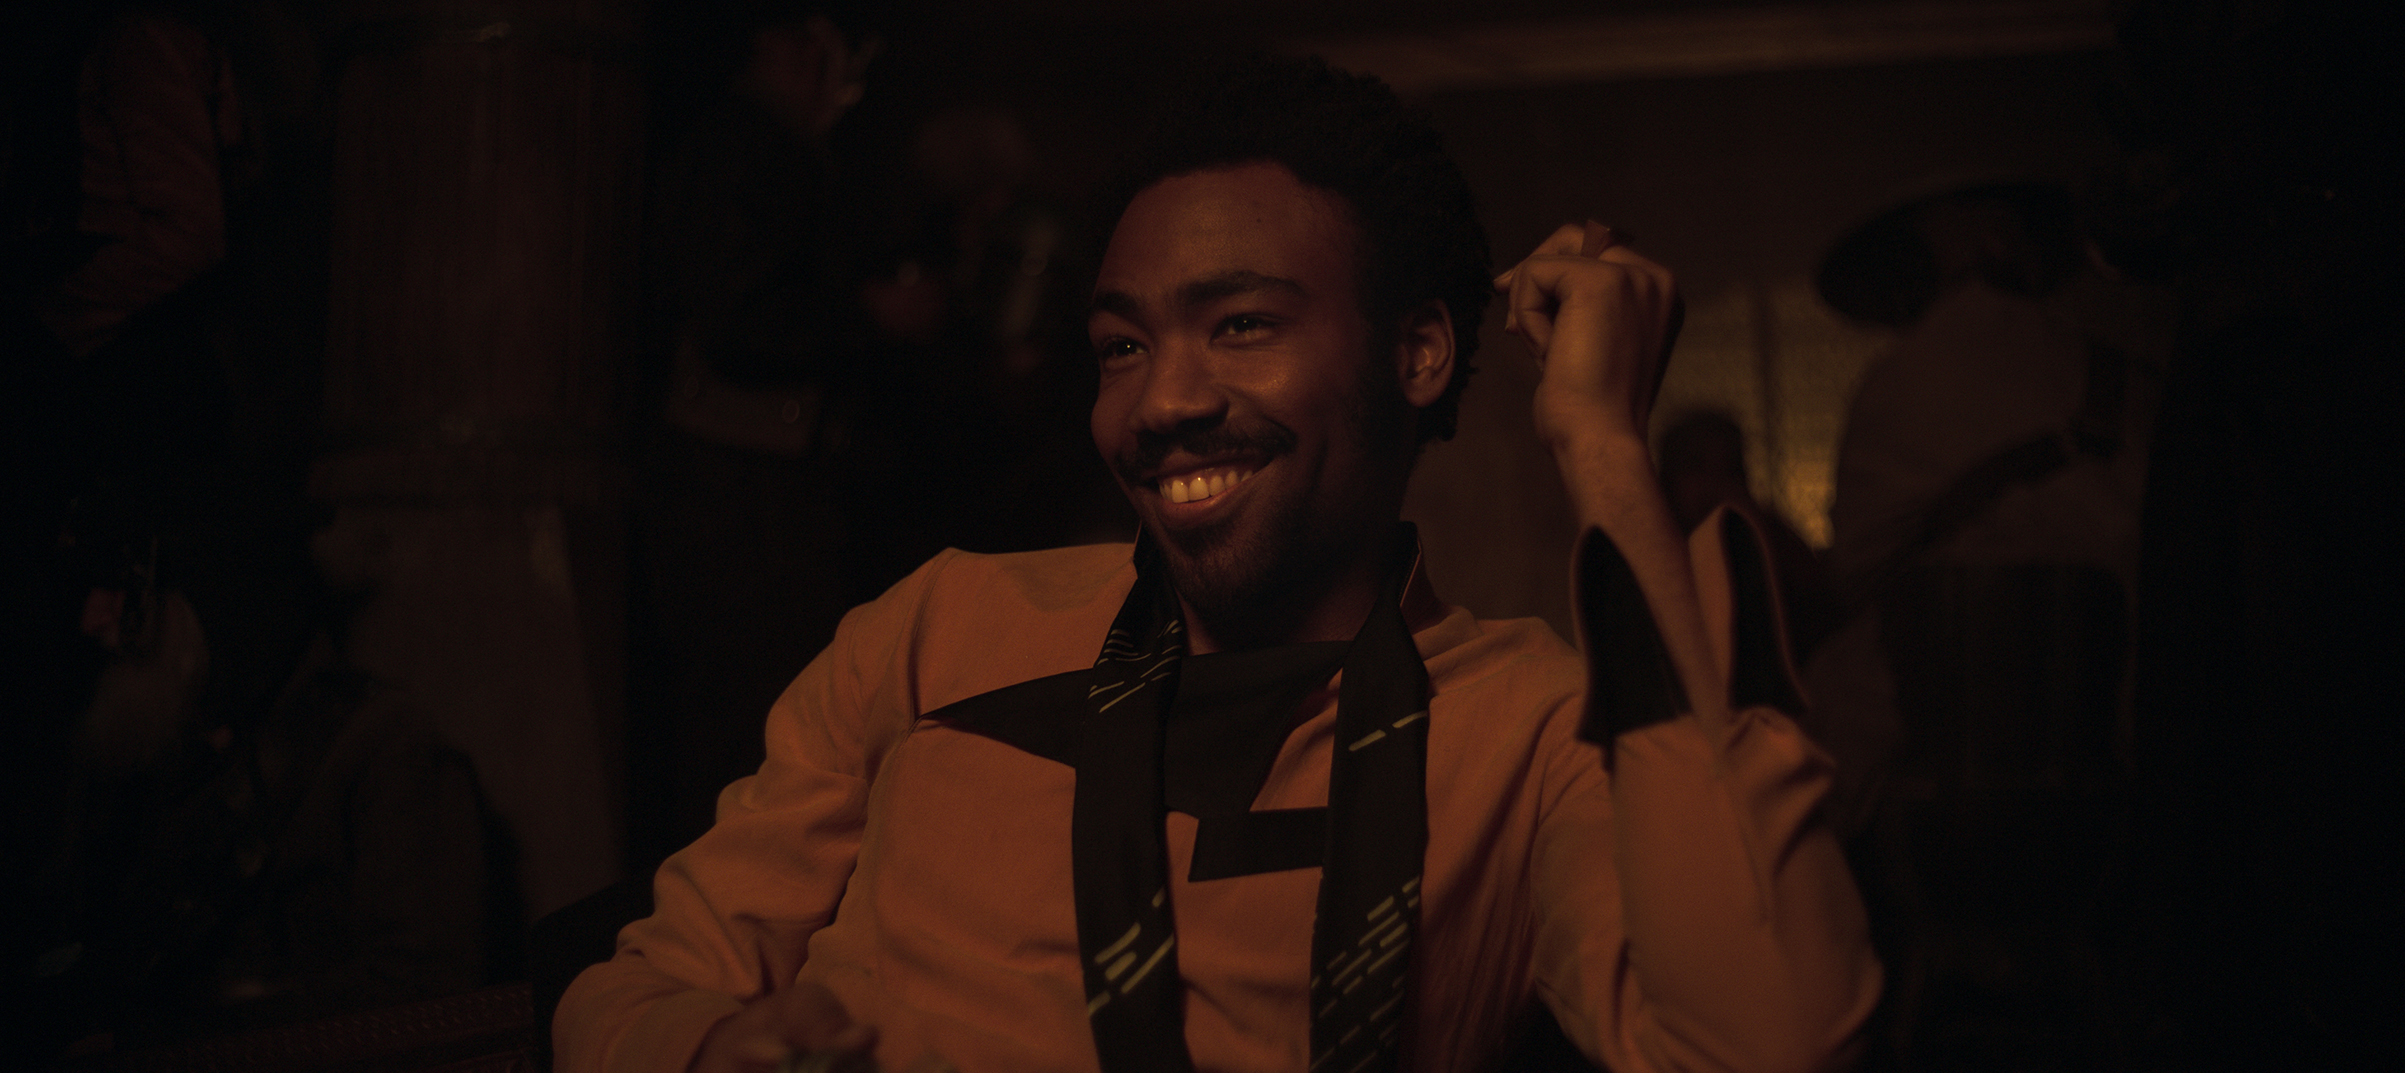 Donald Glover is Lando Calrissian in SOLO: A STAR WARS STORY. (Lucasfilm)